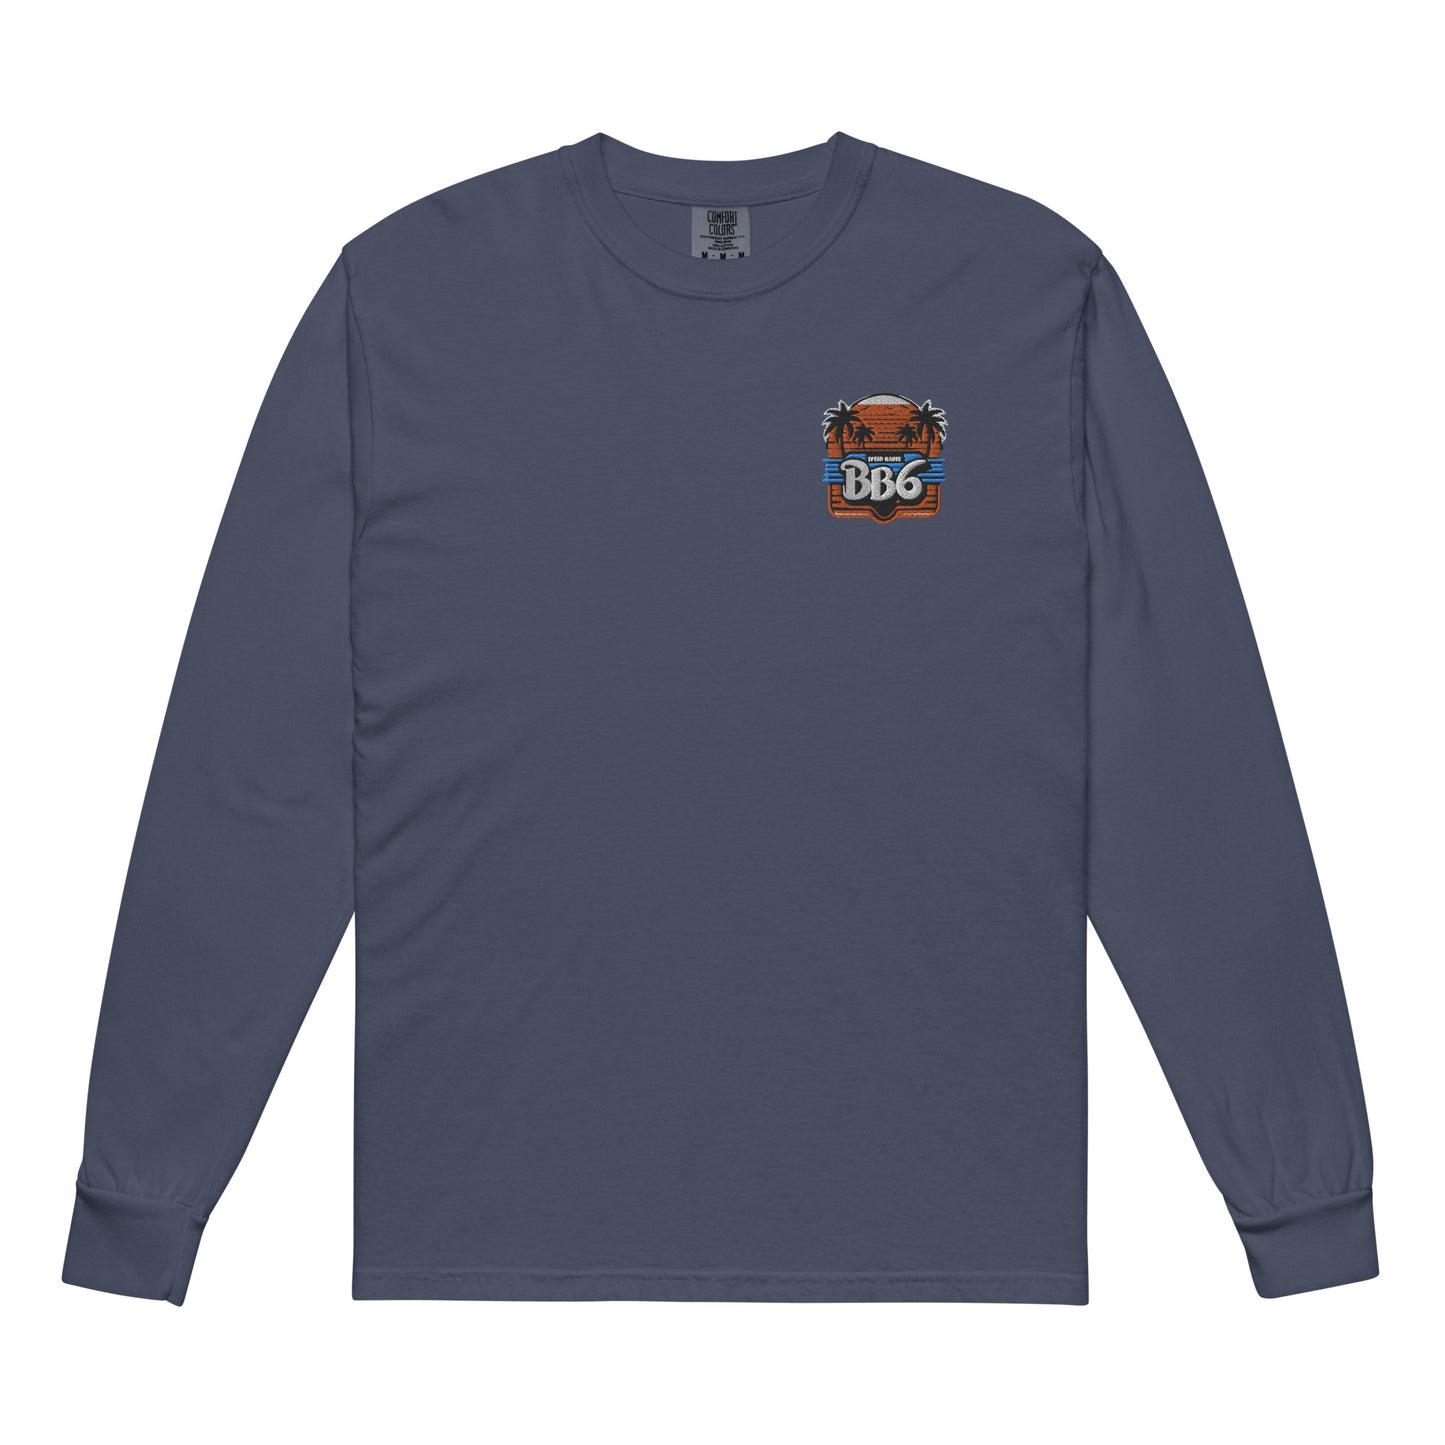 BB6 Embroidery logo with Garment-dyed Heavyweight long-sleeve shirt